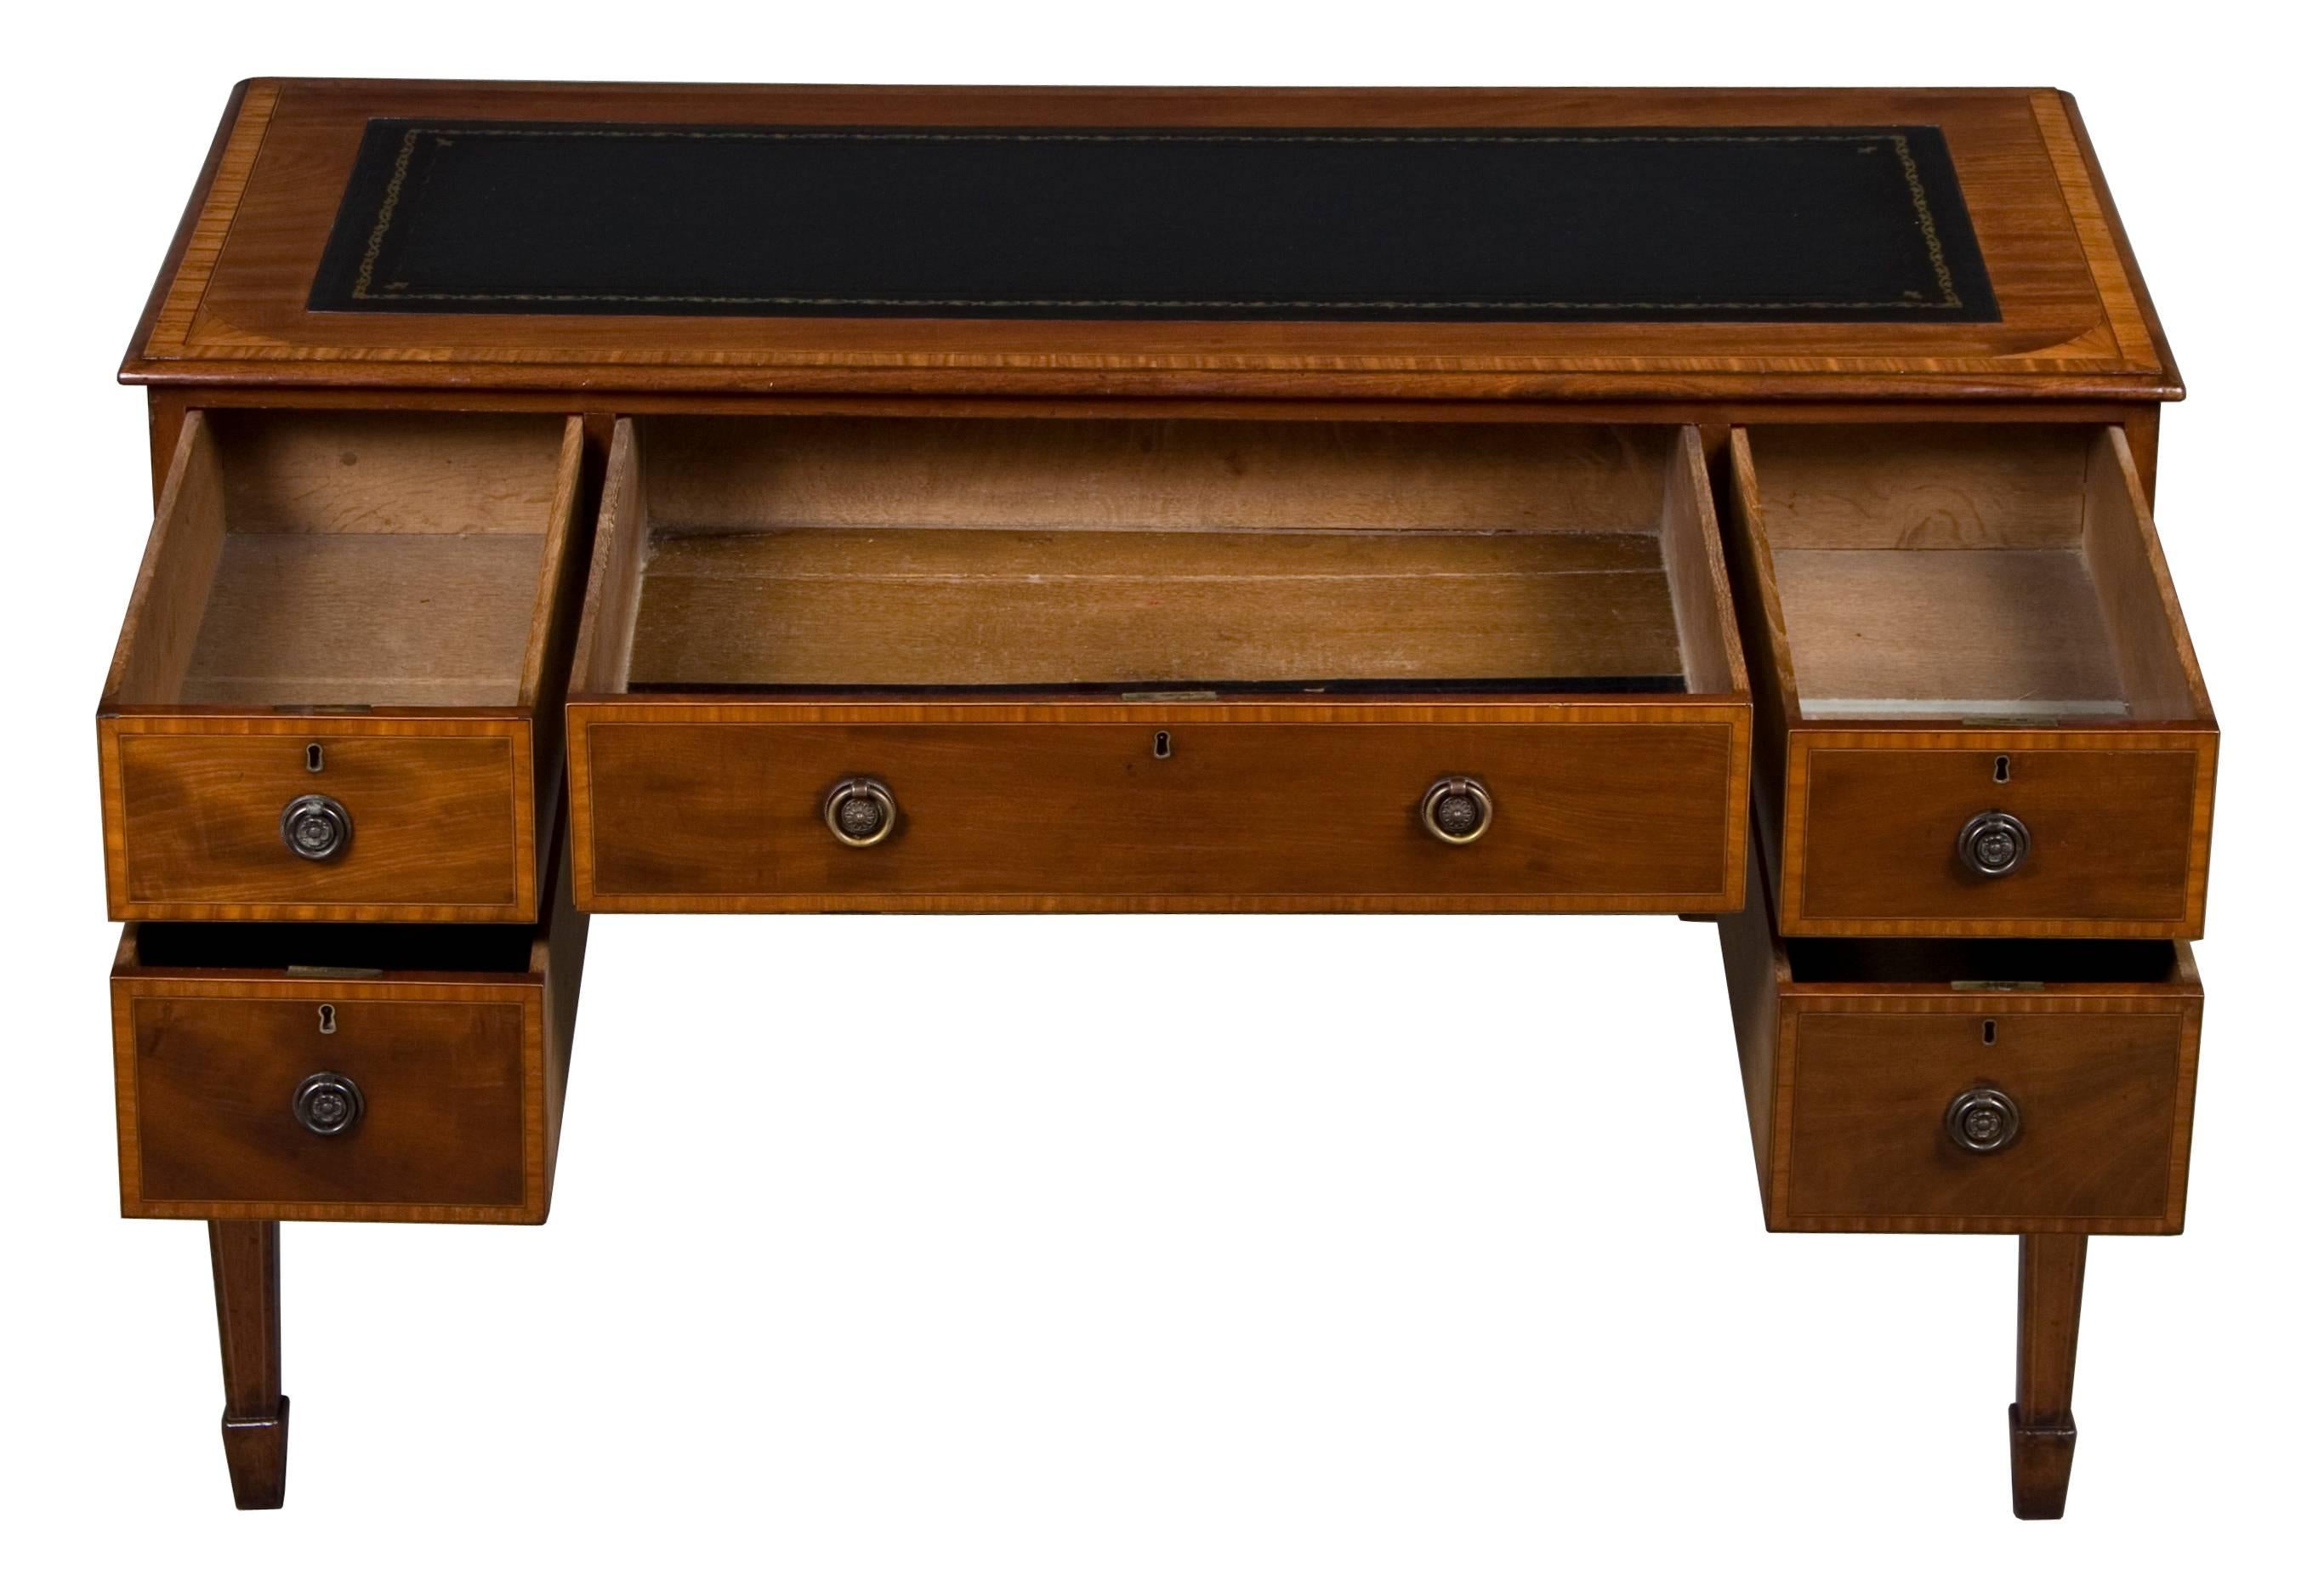 This English mahogany writing desk was made during the Edwardian period around the year 1910. It features five drawers that extend all the way to the back of the desk making the drawers quite large and spacious. As with many Edwardian pieces, the